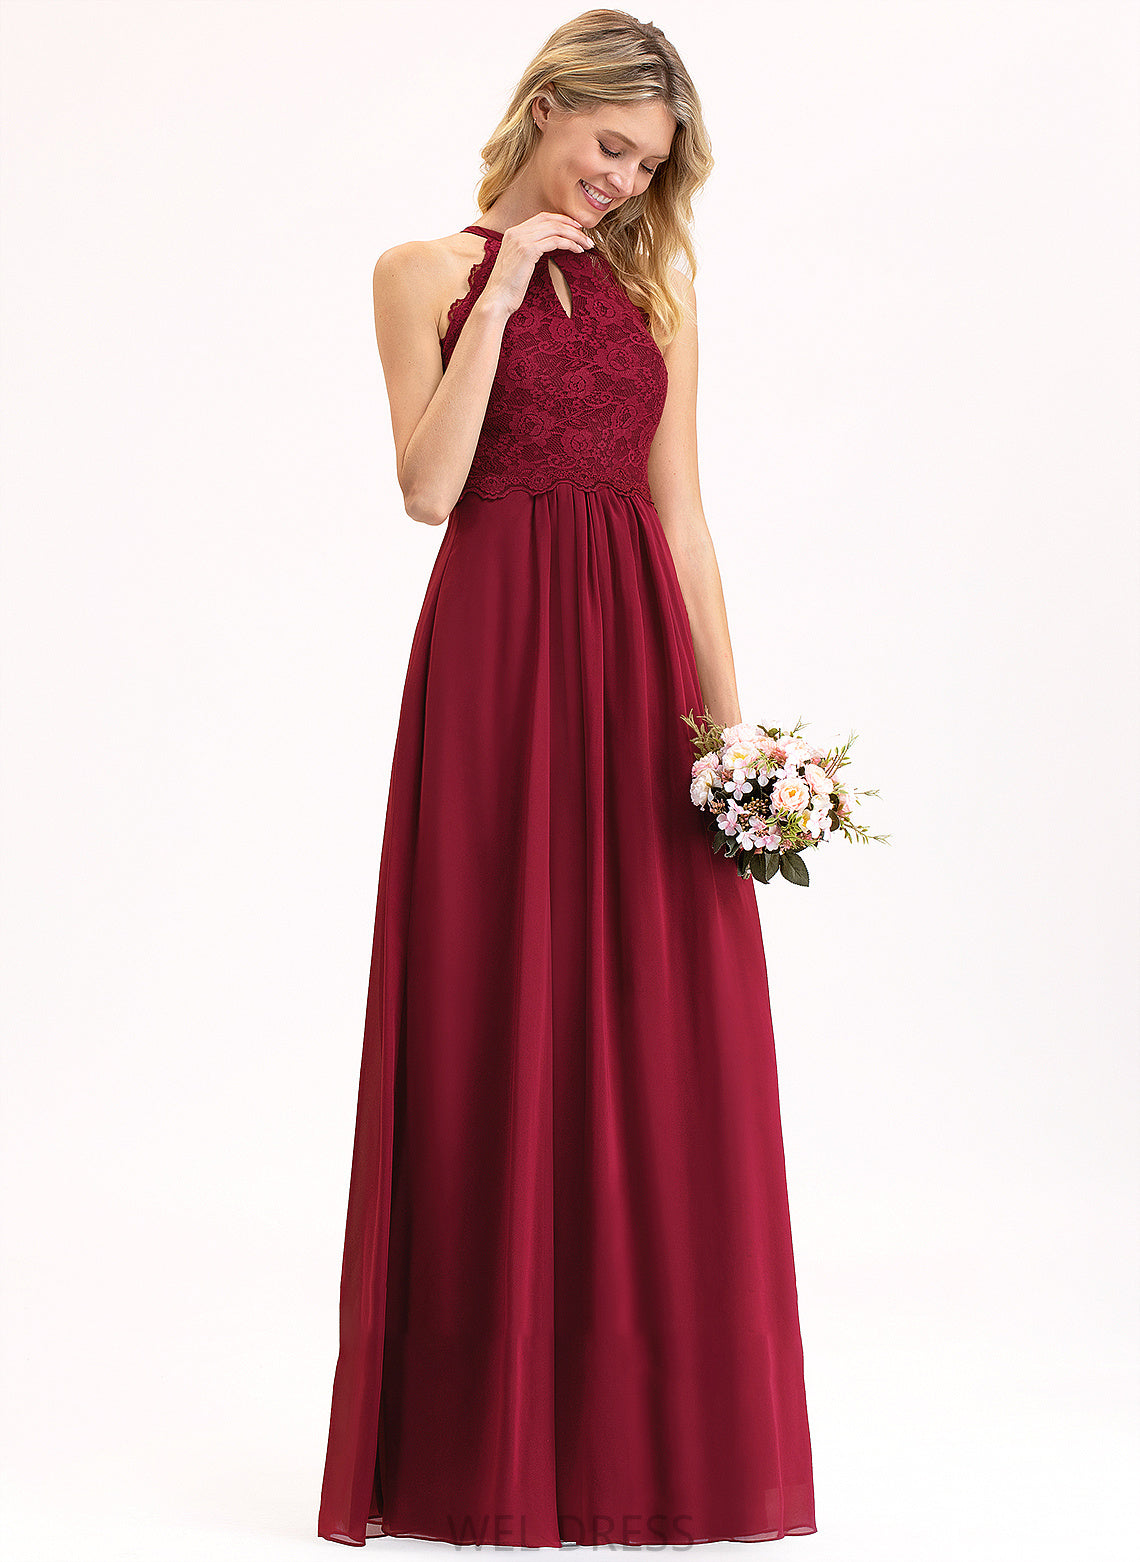 Chiffon Lace Neck A-Line Diana Prom Dresses Floor-Length Scoop